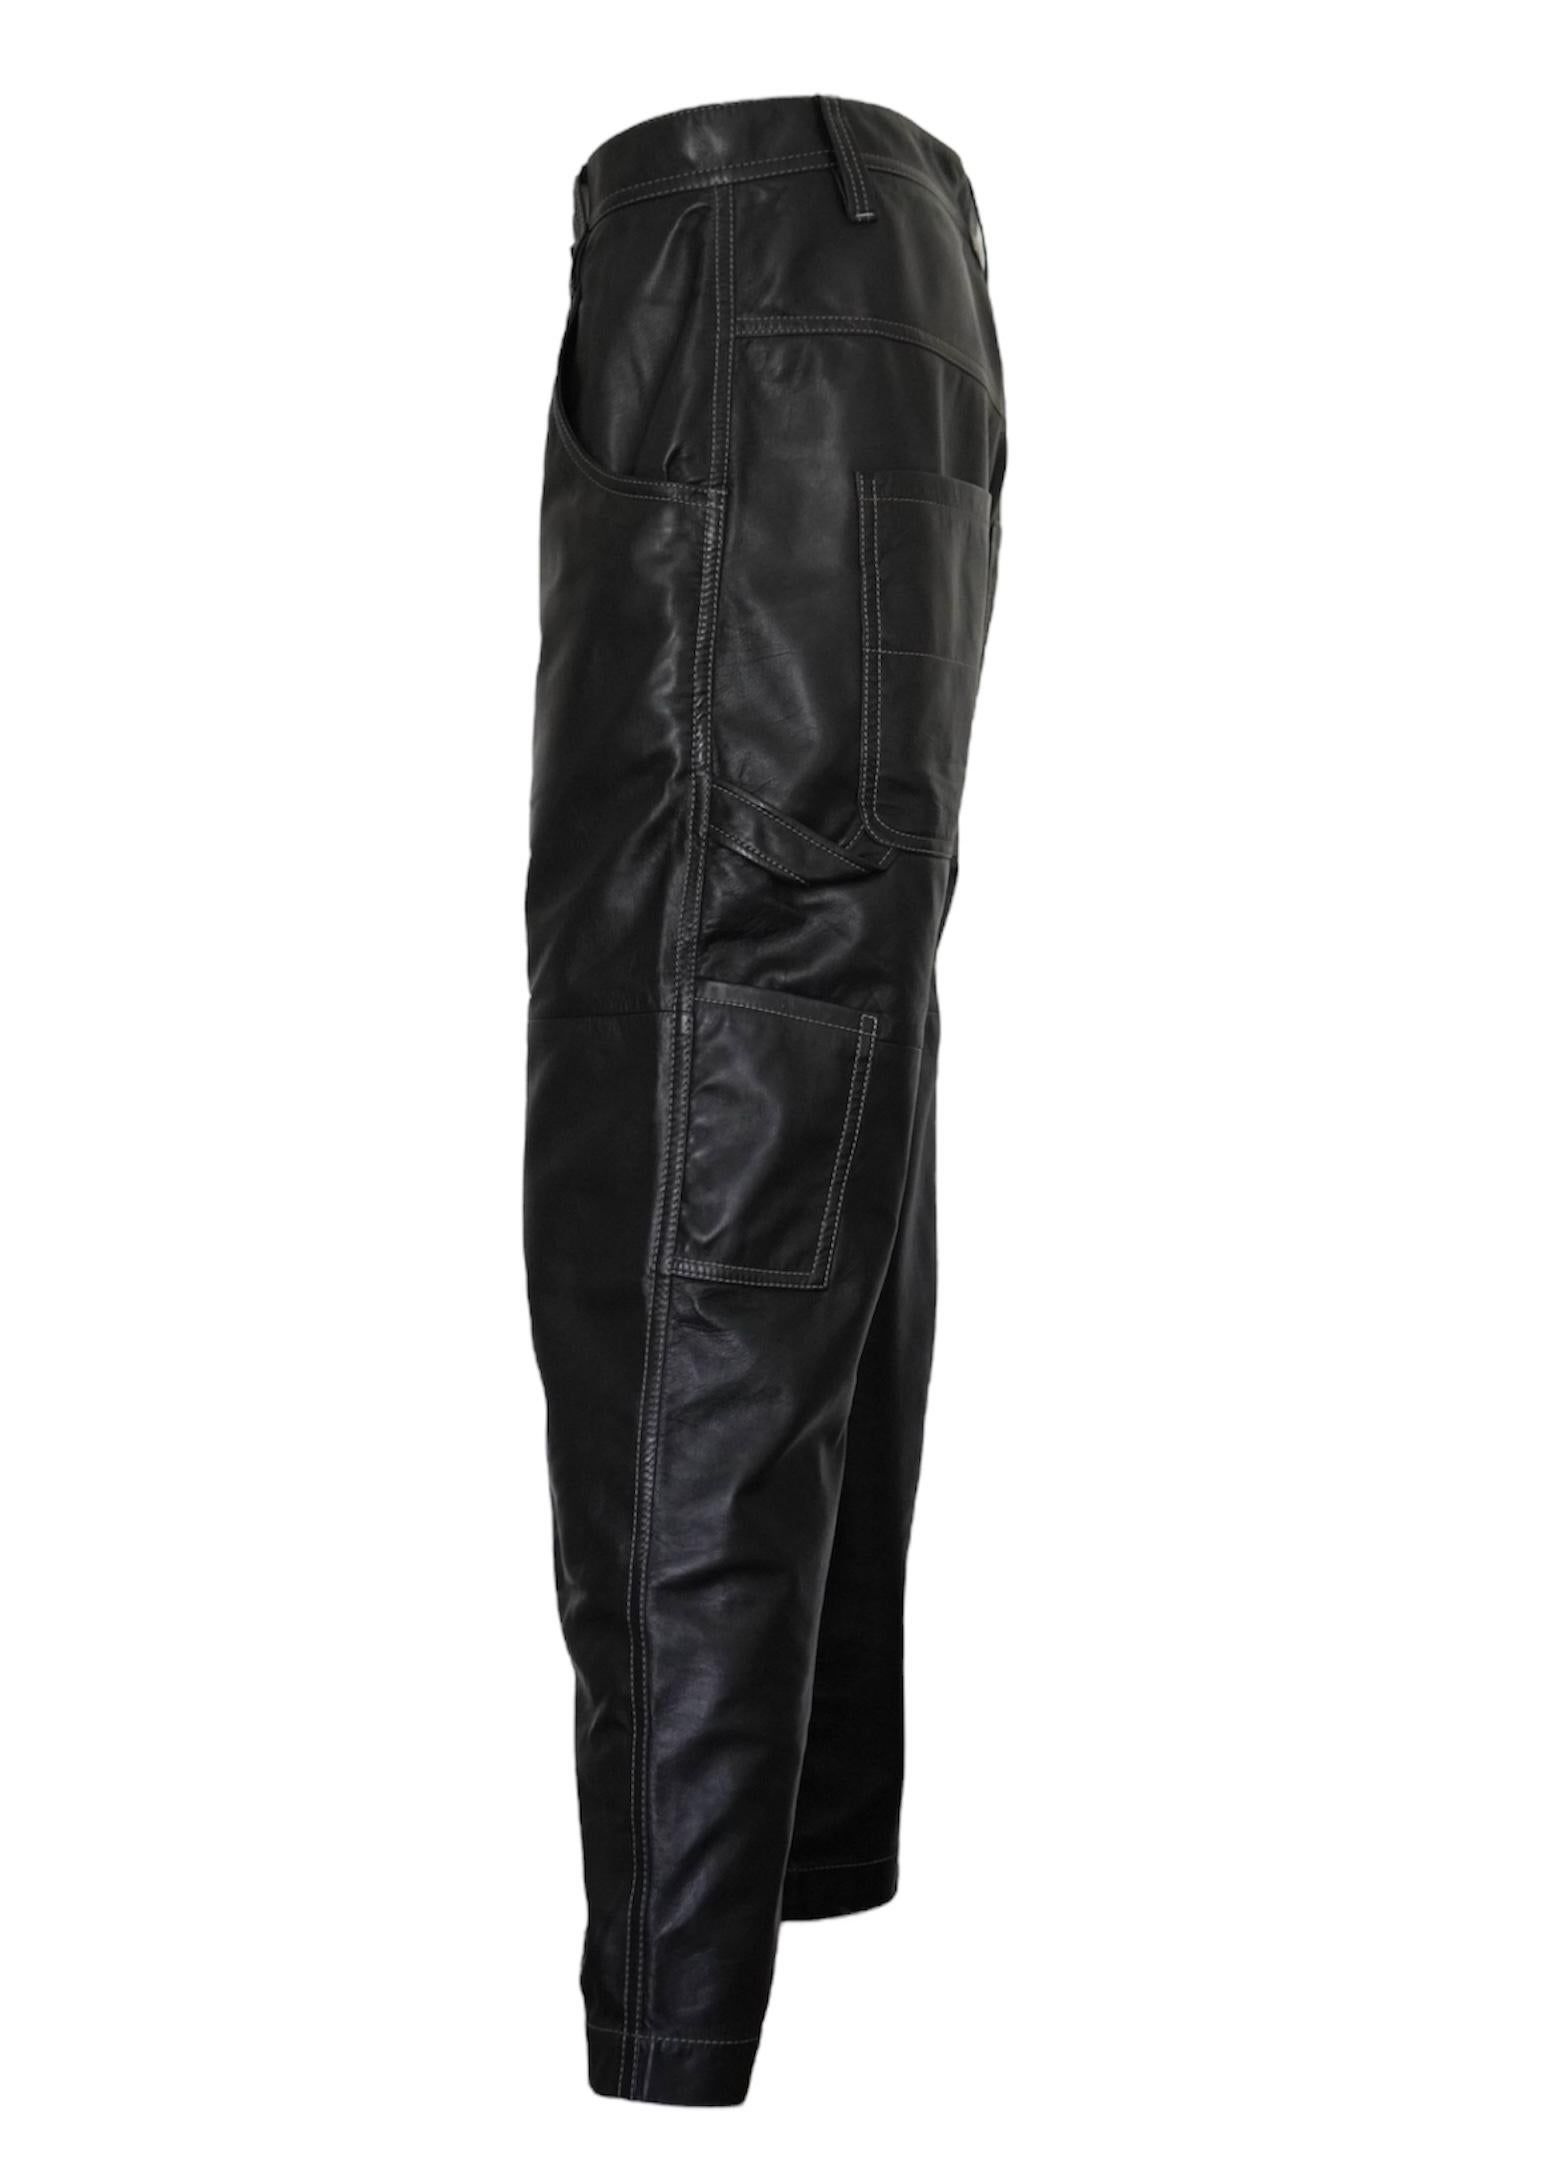 Brunello Cucinelli Black Leather Pants size 6. 
These pants are a looser fit with a cargo vibe. Length 37.5 inches, waist: 32 inches, Hips: 38 inches. Made in Italy. 

Brunello Cucinelli is an Italian luxury fashion brand known for its exquisite